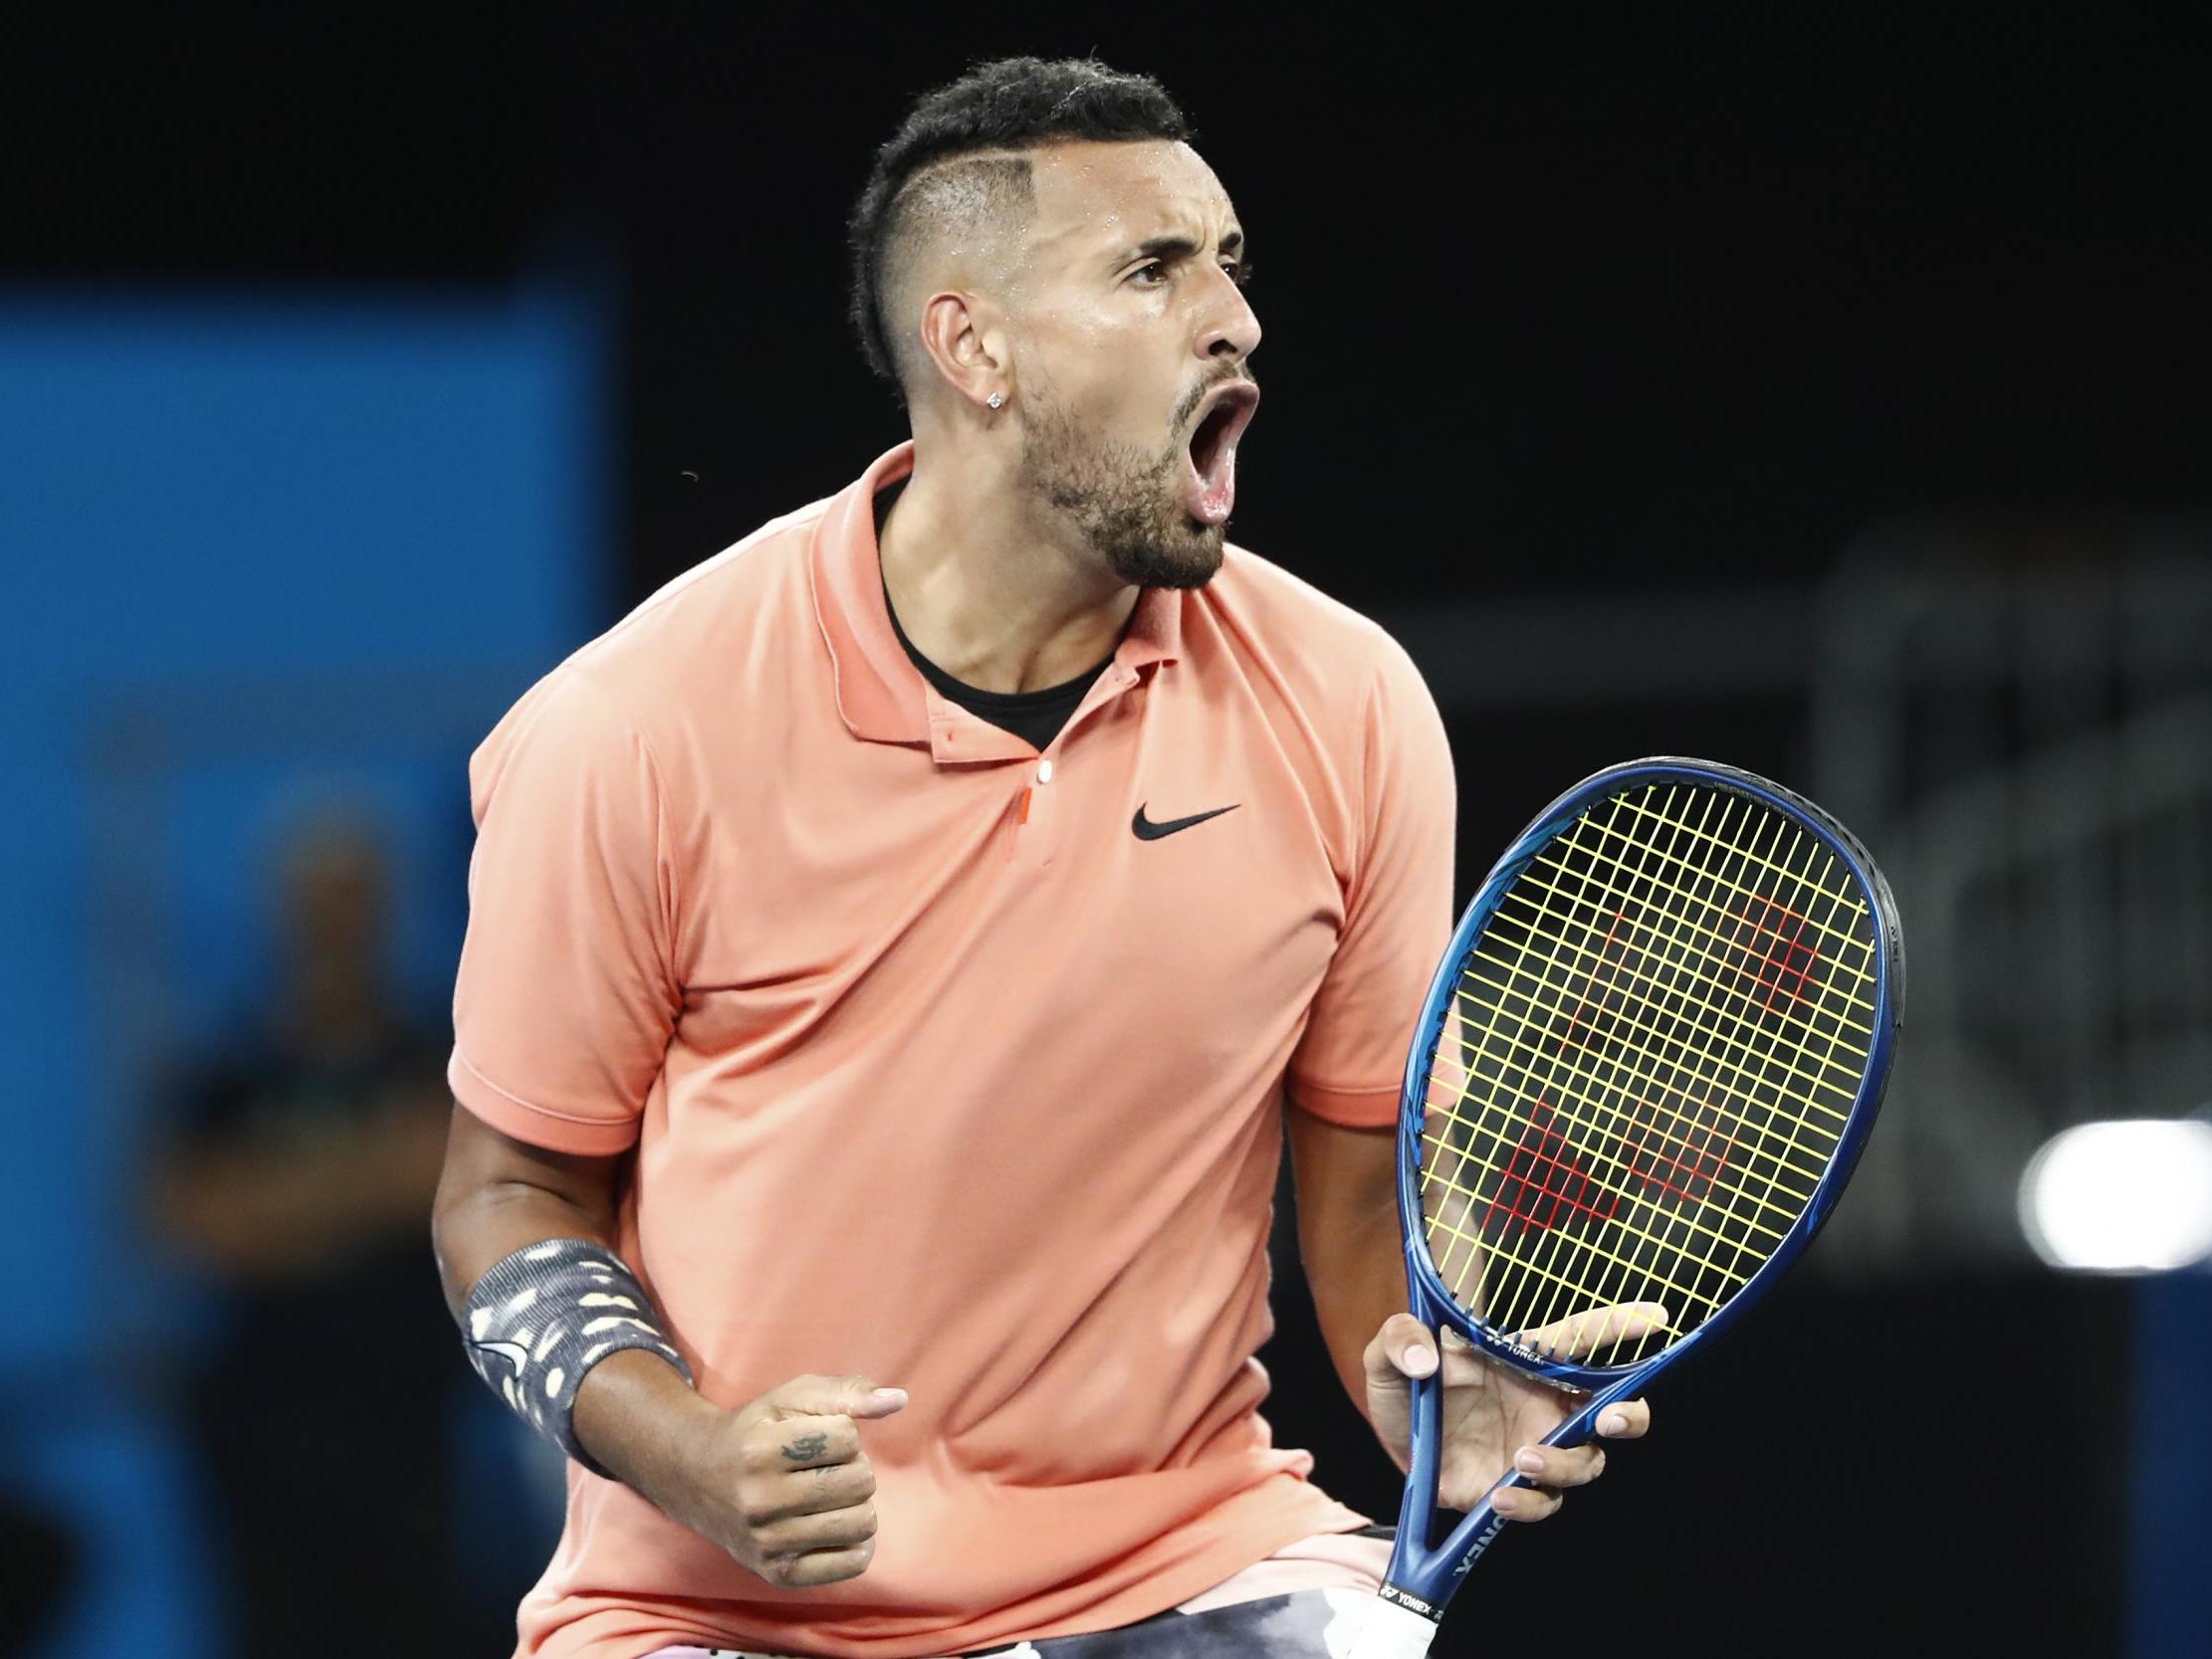 Nick Kyrgios Comes Through Crazy Clash To Set Up Showdown With Rafael Nadal The Independent The Independent